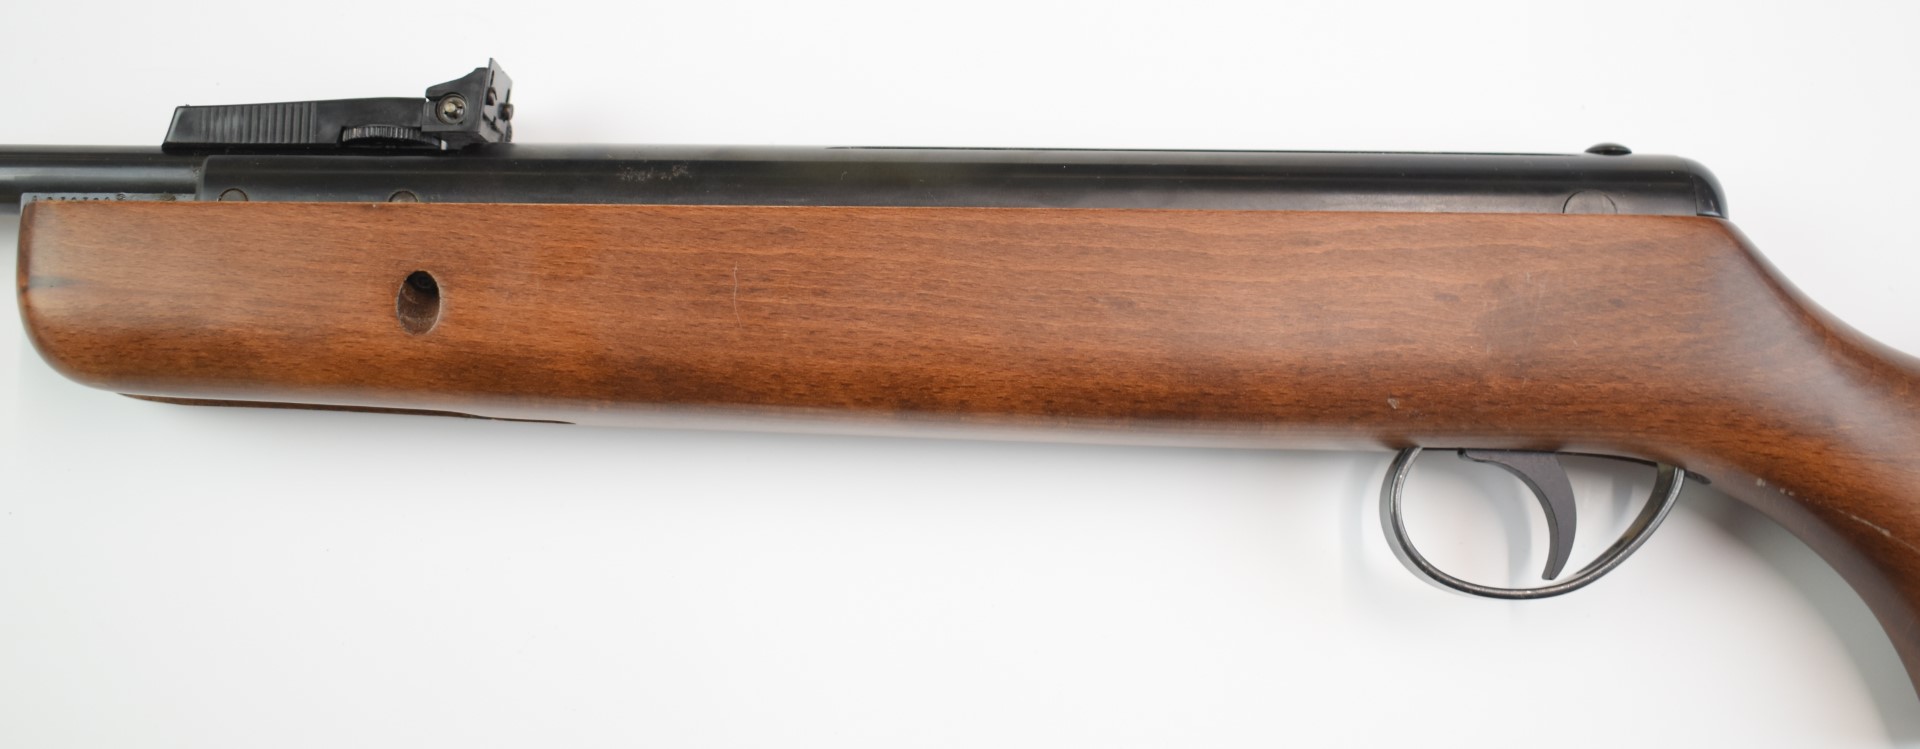 BSA Supersport .177 FAC air rifle with semi-pistol grip and adjustable sights, serial number - Image 15 of 20